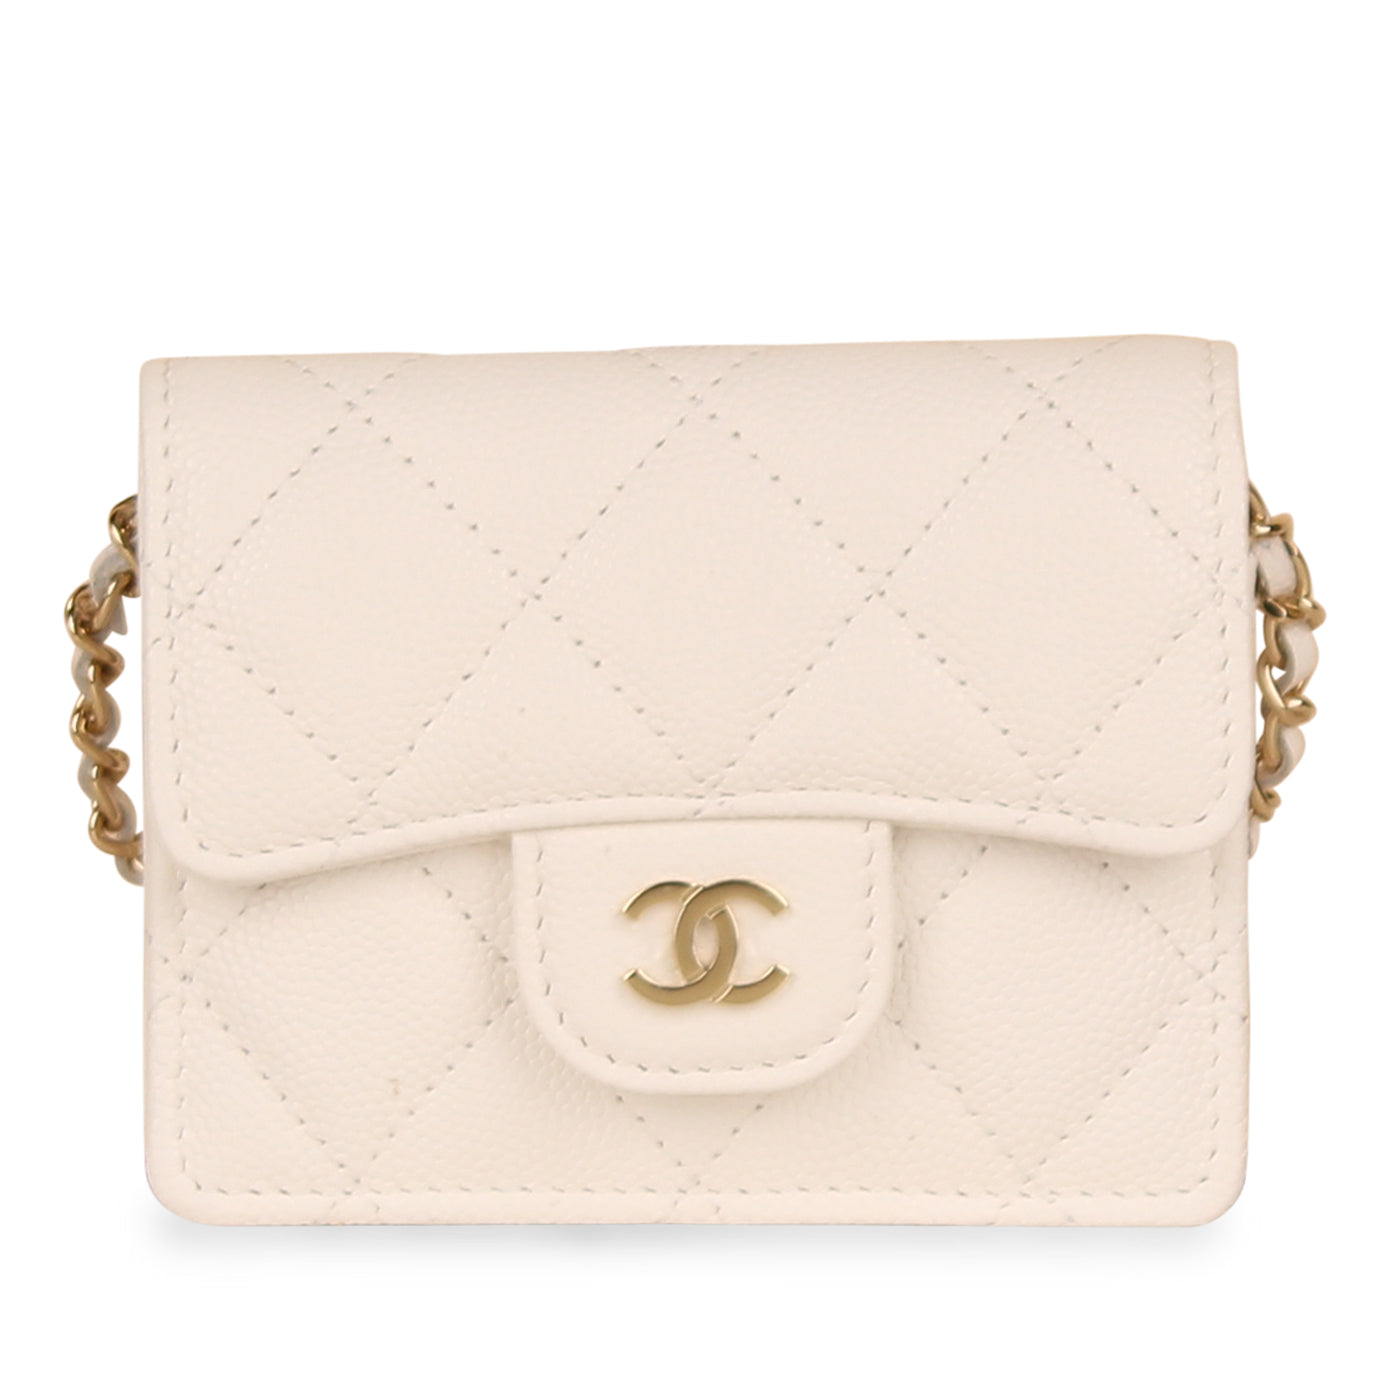 Chanel - Classic Flap Cardholder on Chain - White Caviar - GHW - Brand ...